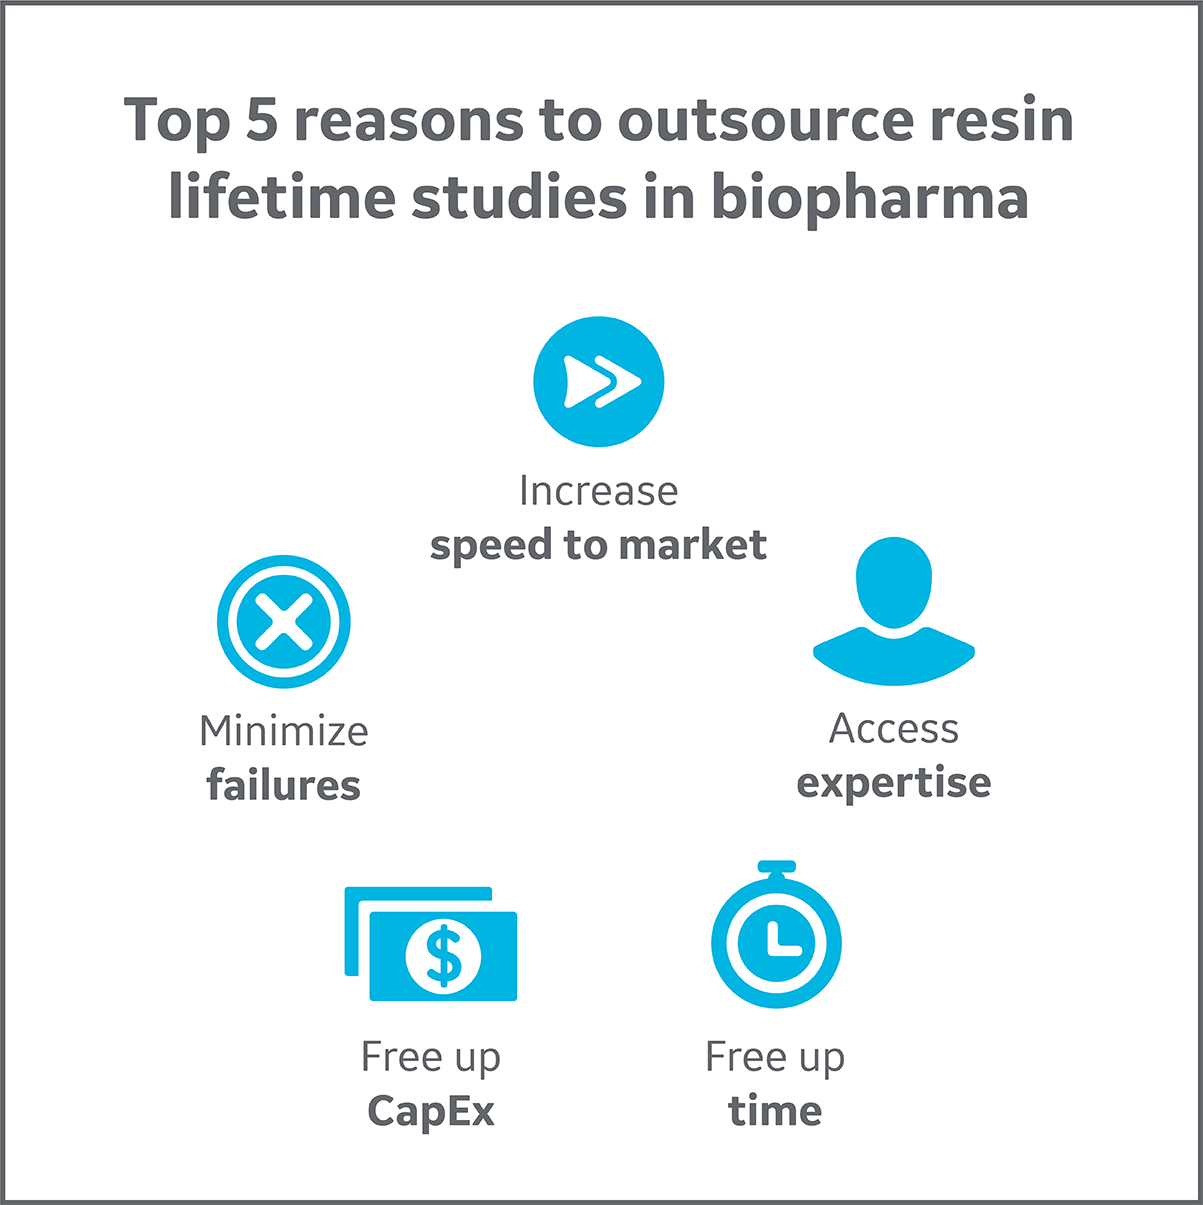 Top reasons for outsourcing chromatography resin lifetime studies in biopharma.